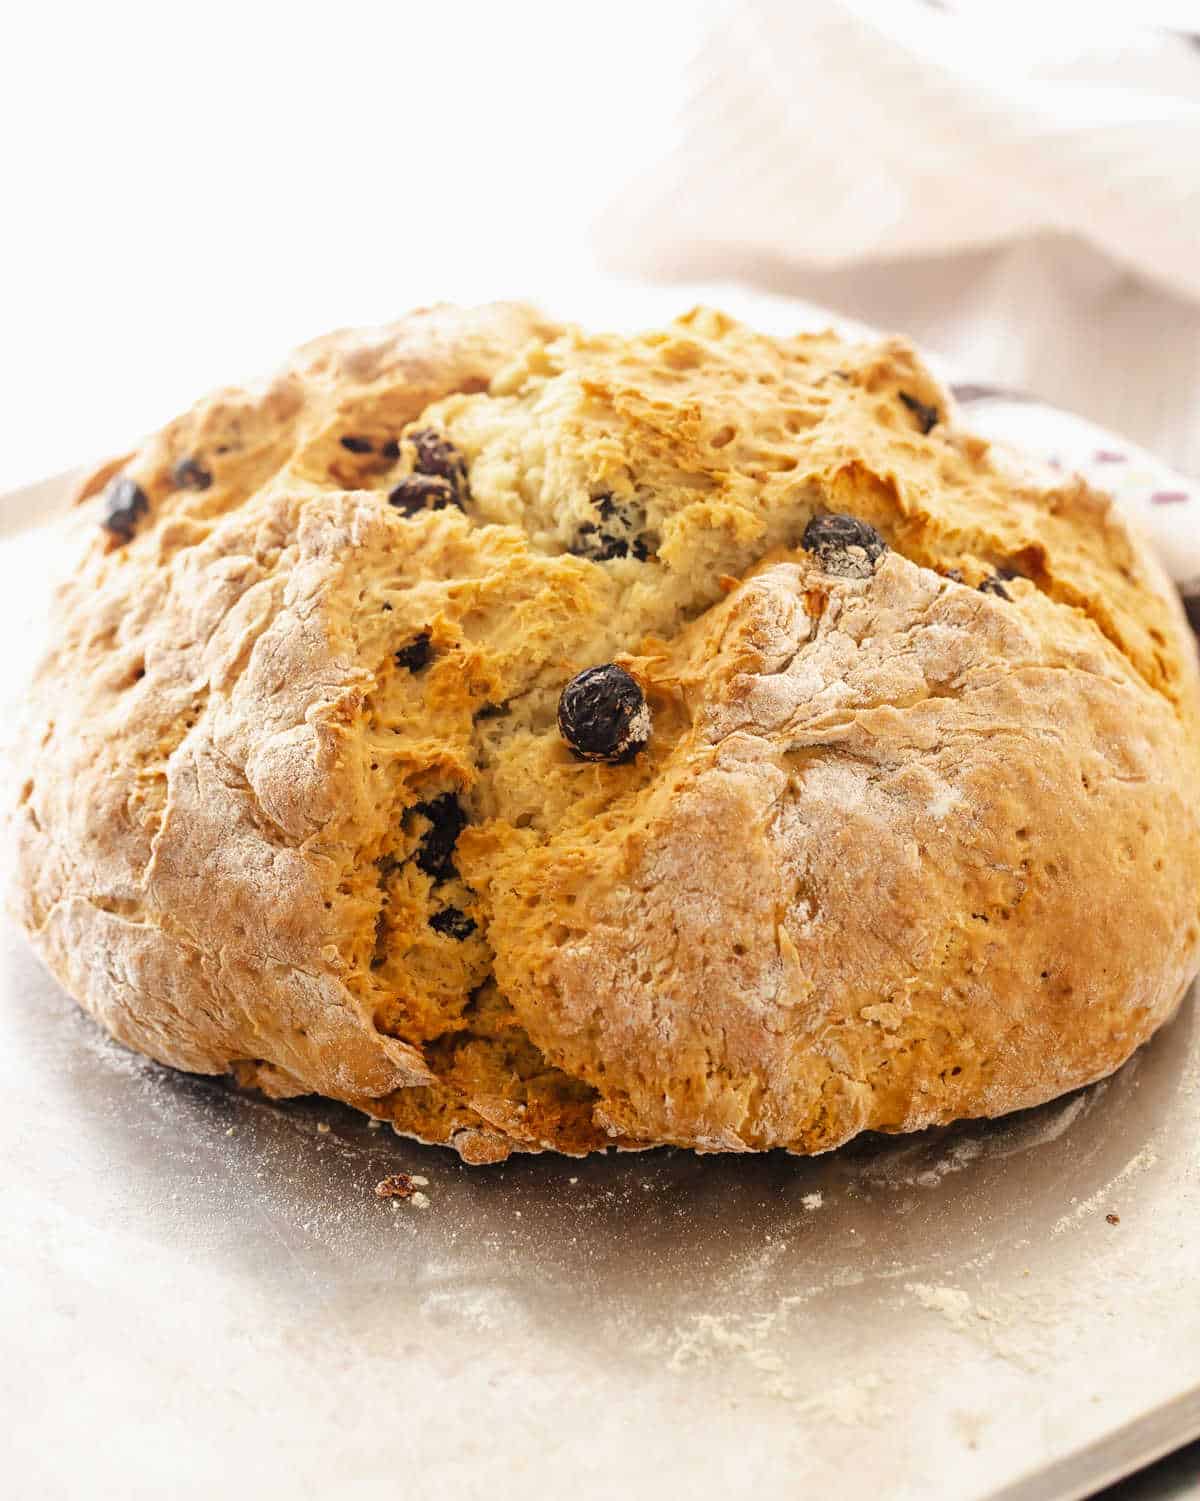 Whole loaf of soda bread with raisins on metal sheet, white background.